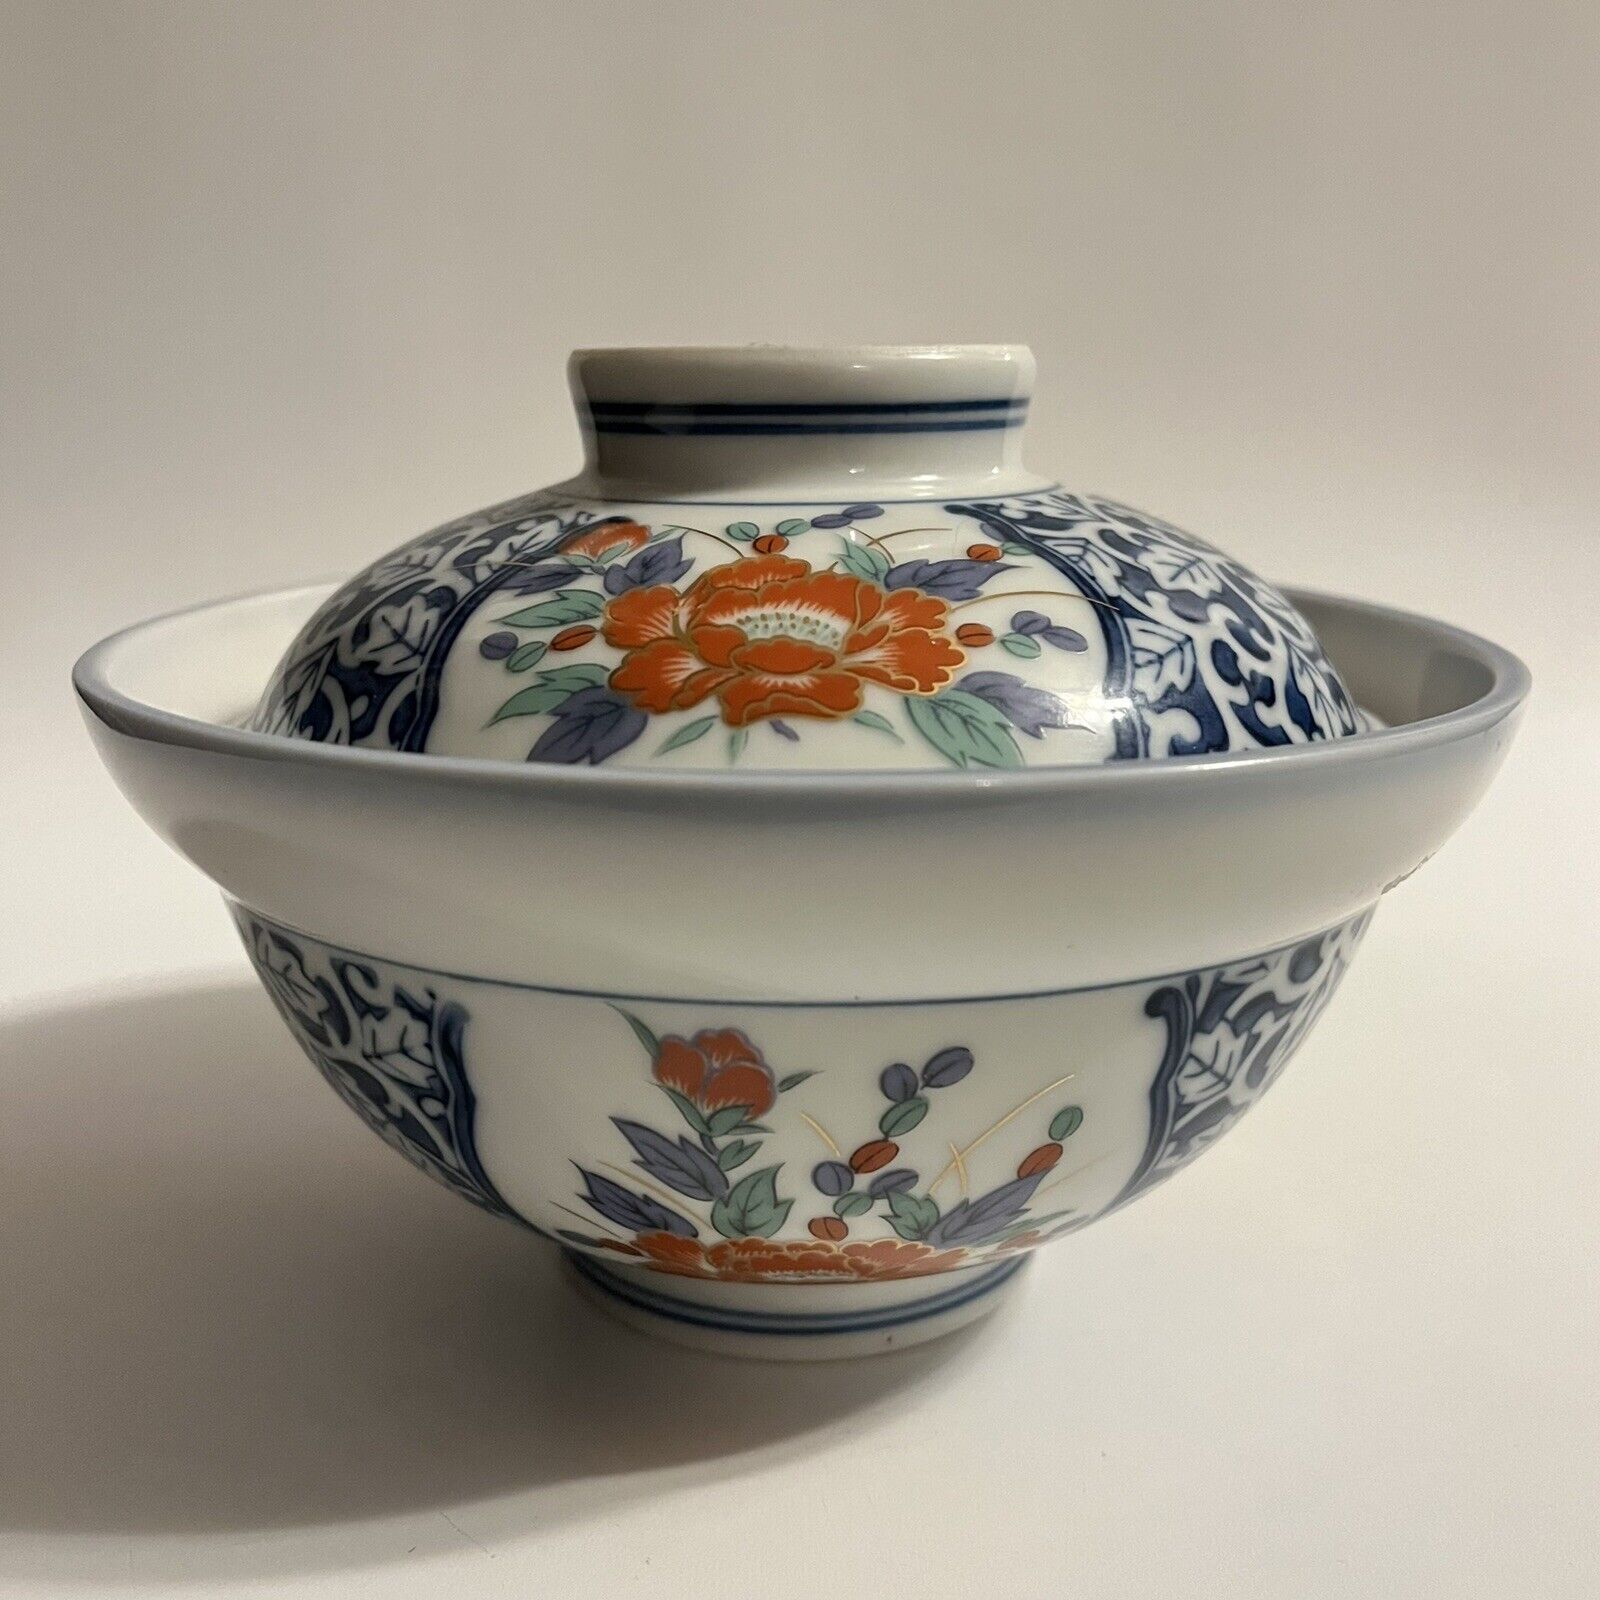 Japanese Porcelain Floral OMC Udon Donburi Rice Bowl with Lid Blue Red White 6